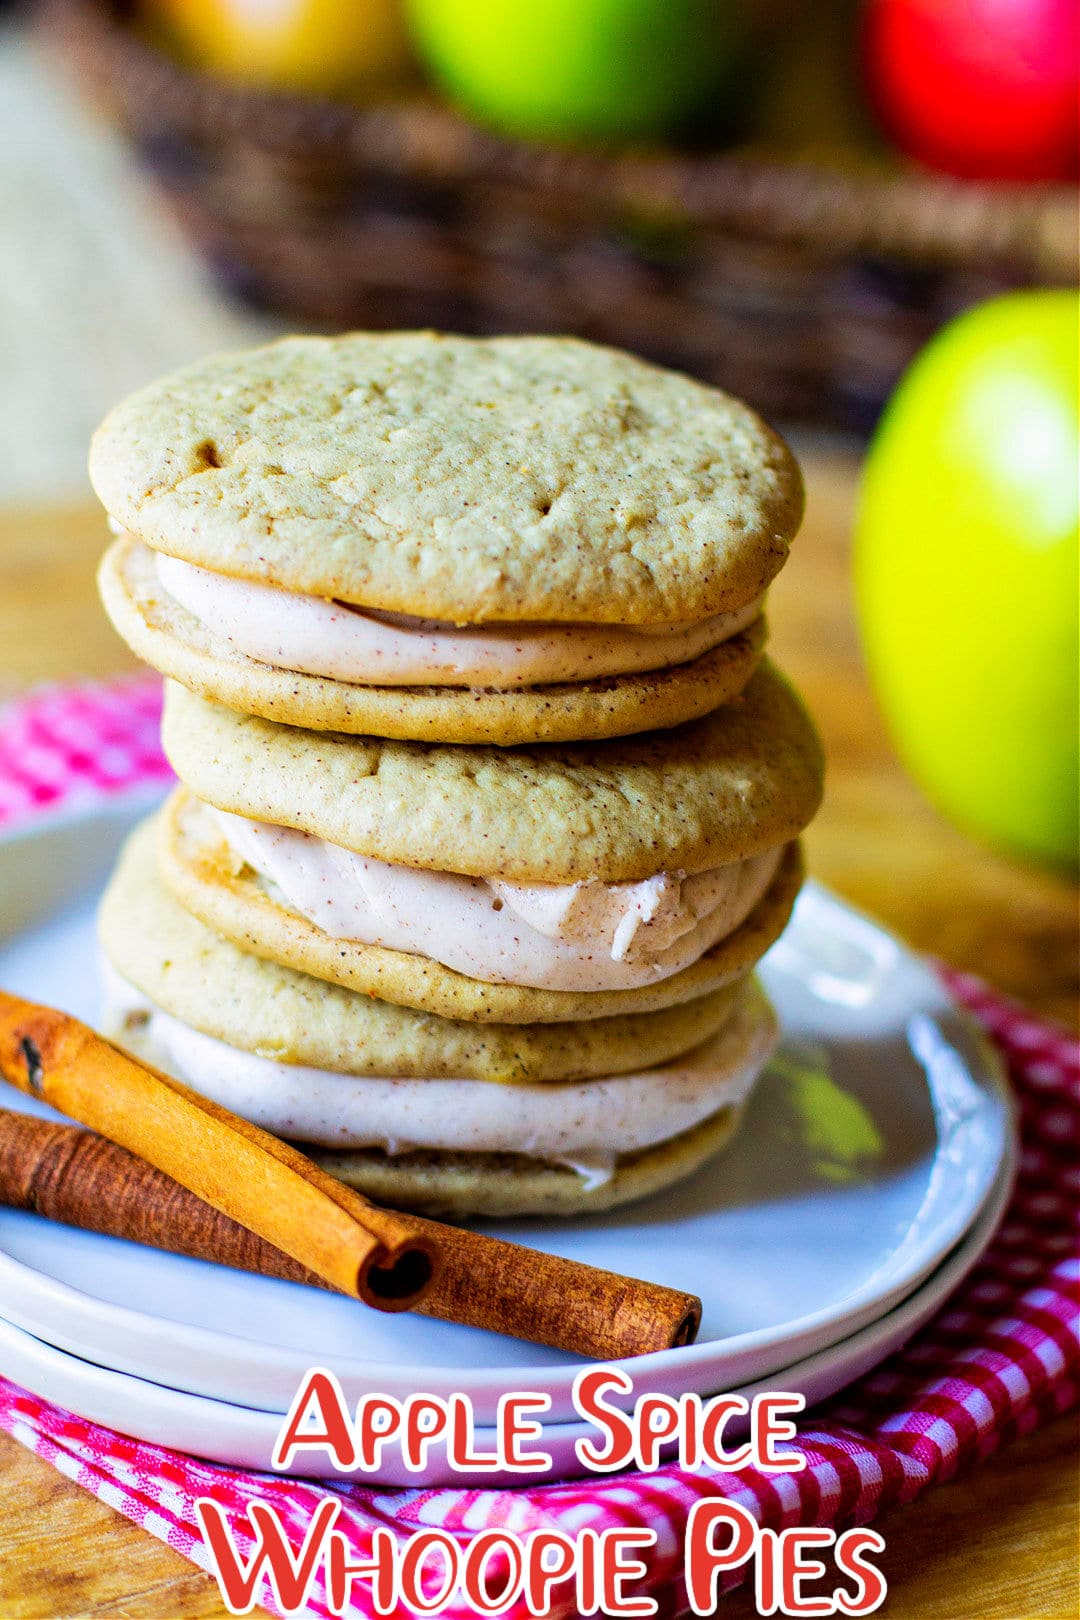 Apple Pie Whoopie Pies stacked on a plate.